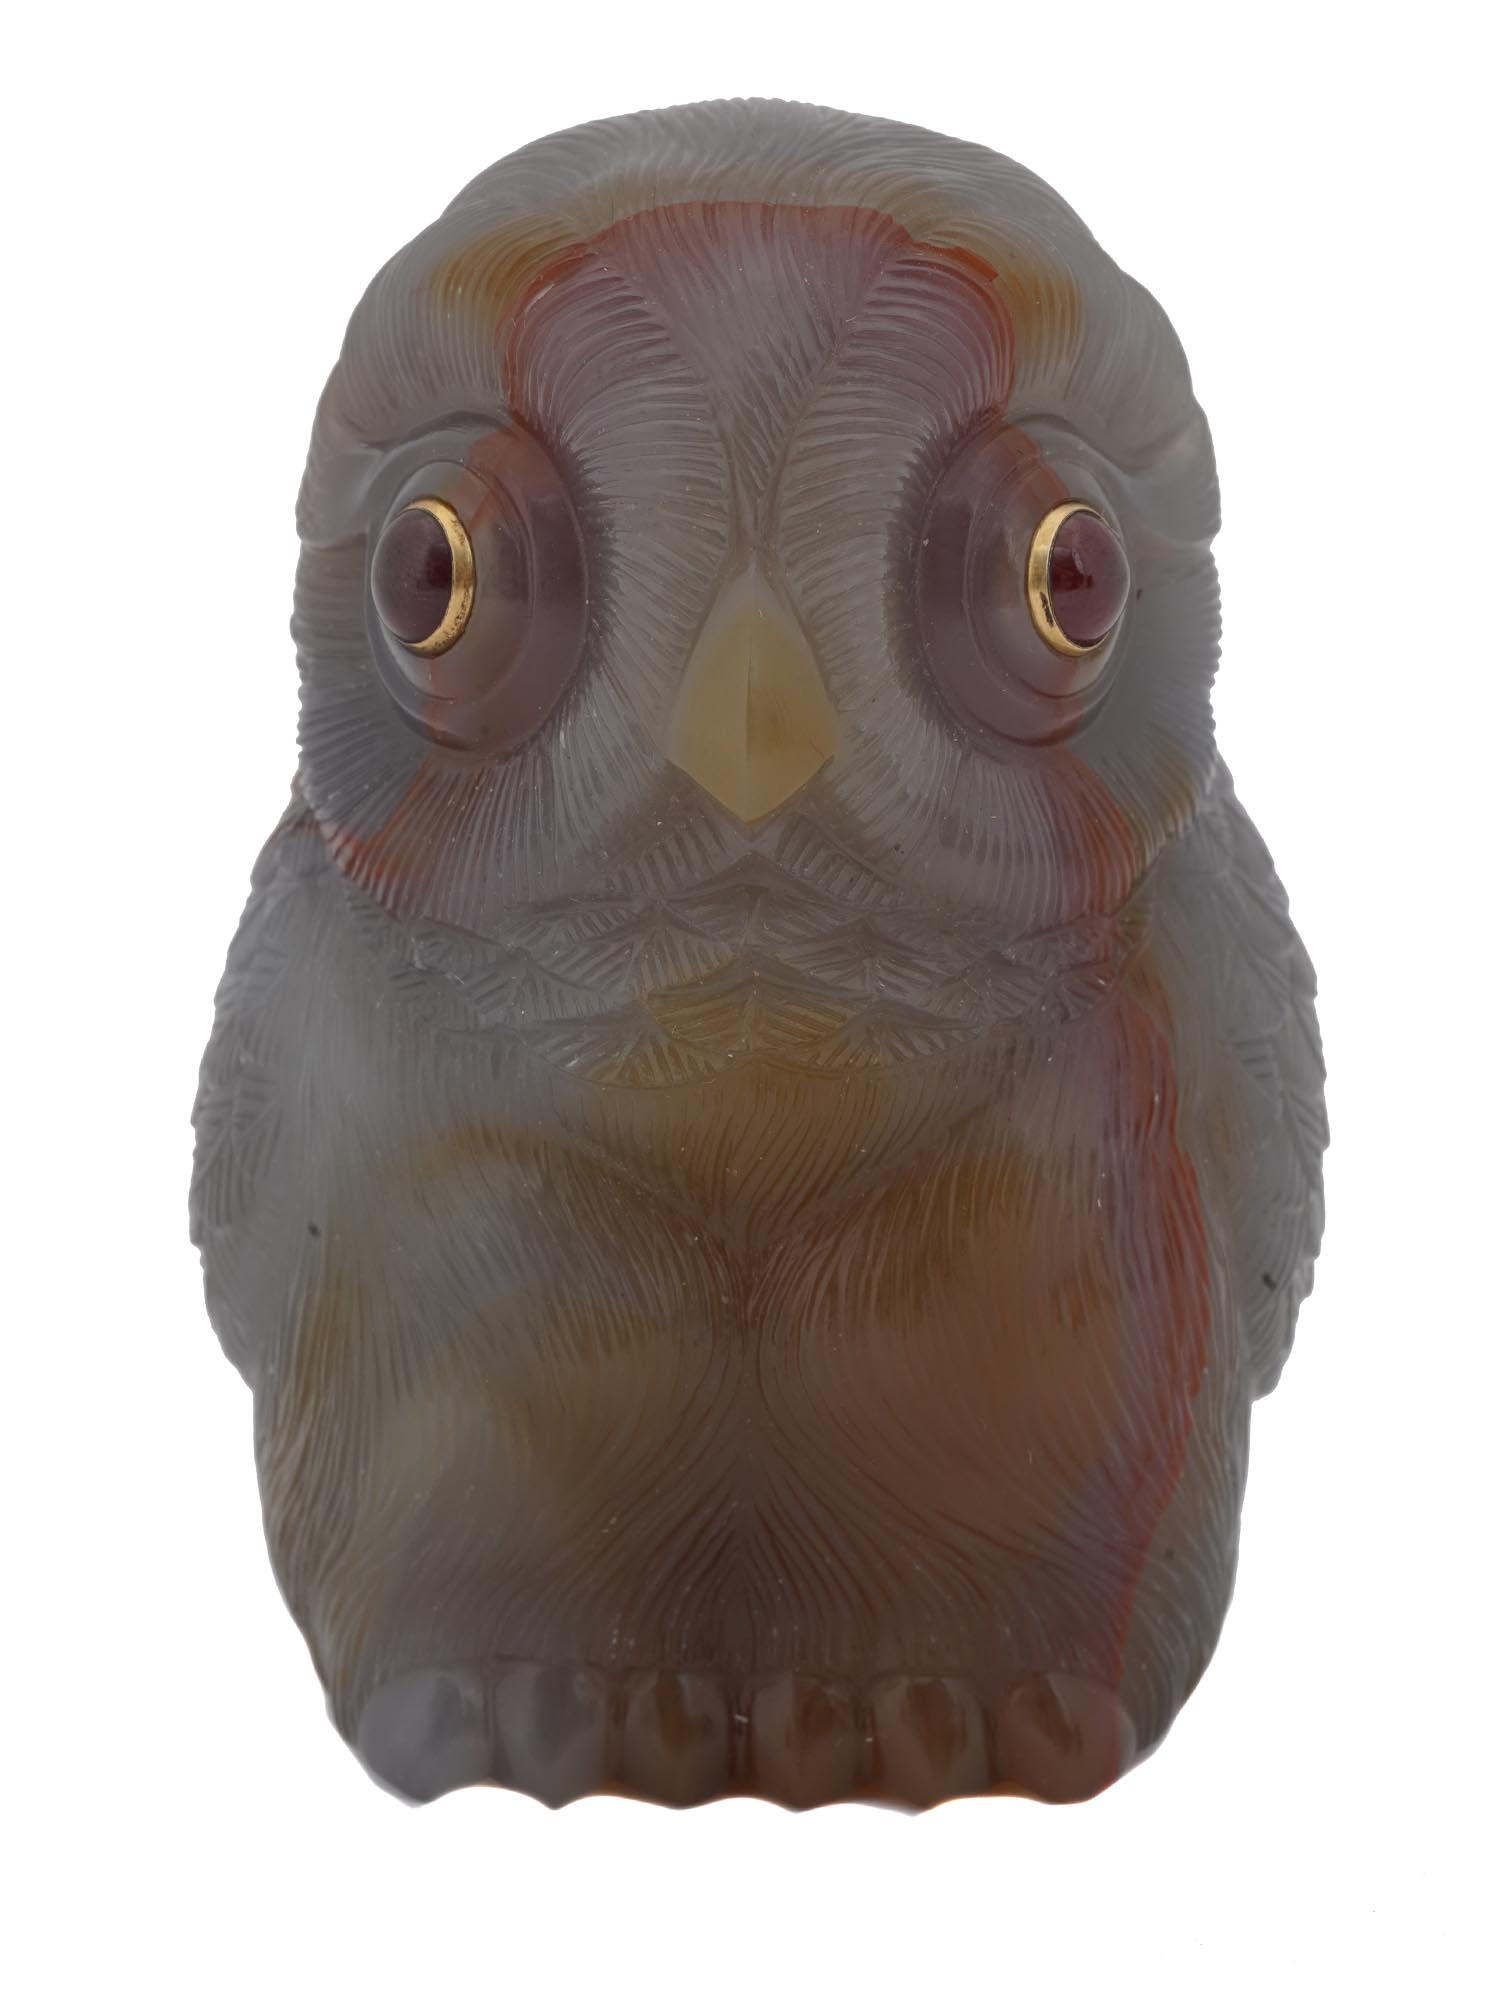 RUSSIAN CARVED AGATE OWL FIGURINE WITH RUBY EYES PIC-3